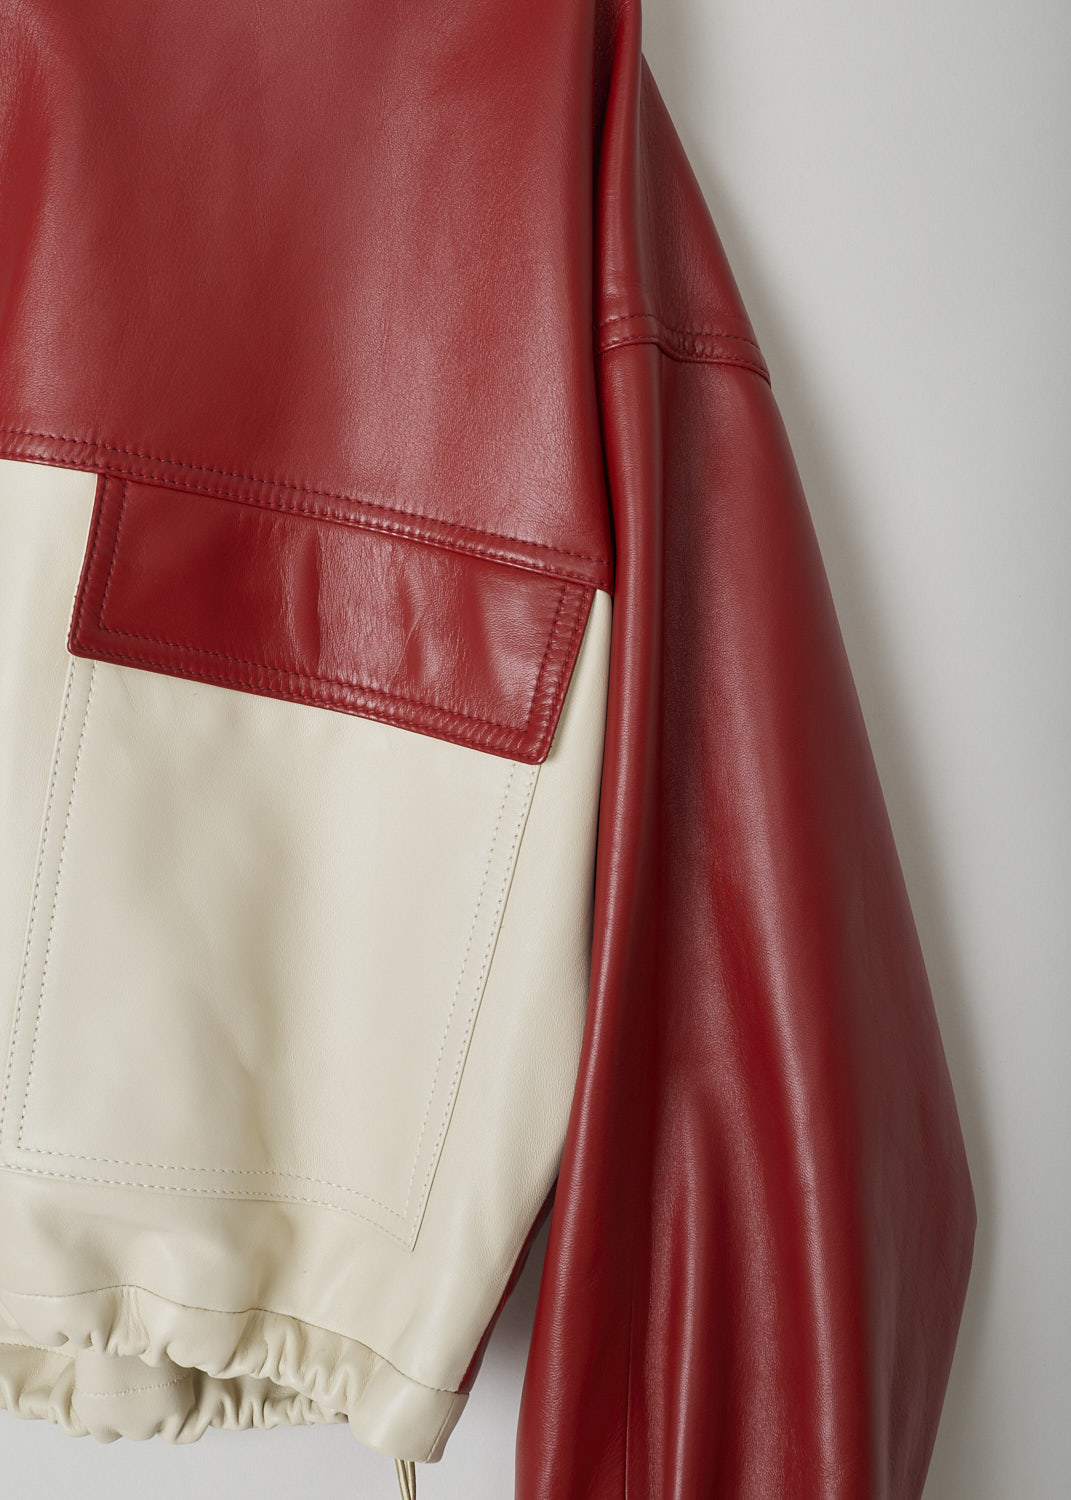 CELINE, TWO-TONE CROPPED LEATHER JACKET, 150T_2EE13_27LV, Red, Beige, Detail 1, This cropped leather jacket is  two-toned, with the top half in lipstick red and the bottom half and the back in off-white. The jacket has a stand-up collar, two patch pockets with flap and a zipper in a matching off-white color. The gold-tone pull-tab is shaped in the brand's logo. The long sleeves have elasticated cuffs. The elasticated hemline has gold-tone cord locks on the inside. The jackets has a single inner pocket

